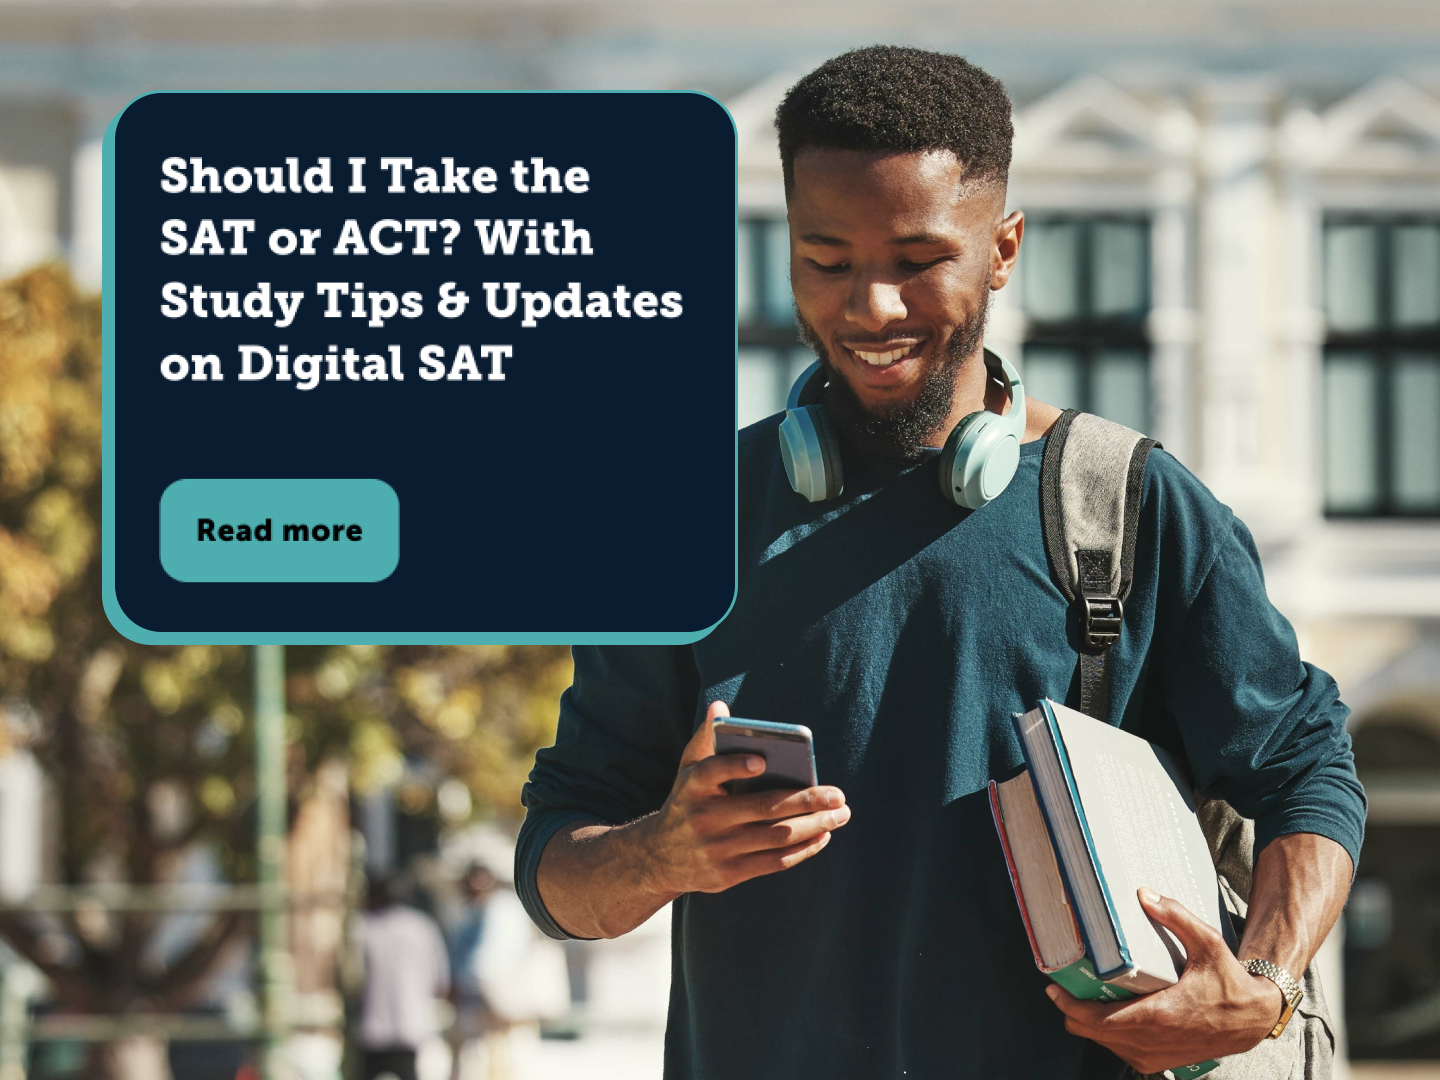 a person looking at a phone with text that reads 'Should I Take the SAT or ACT? With Study Tips & Updates on Digital SAT, read more'